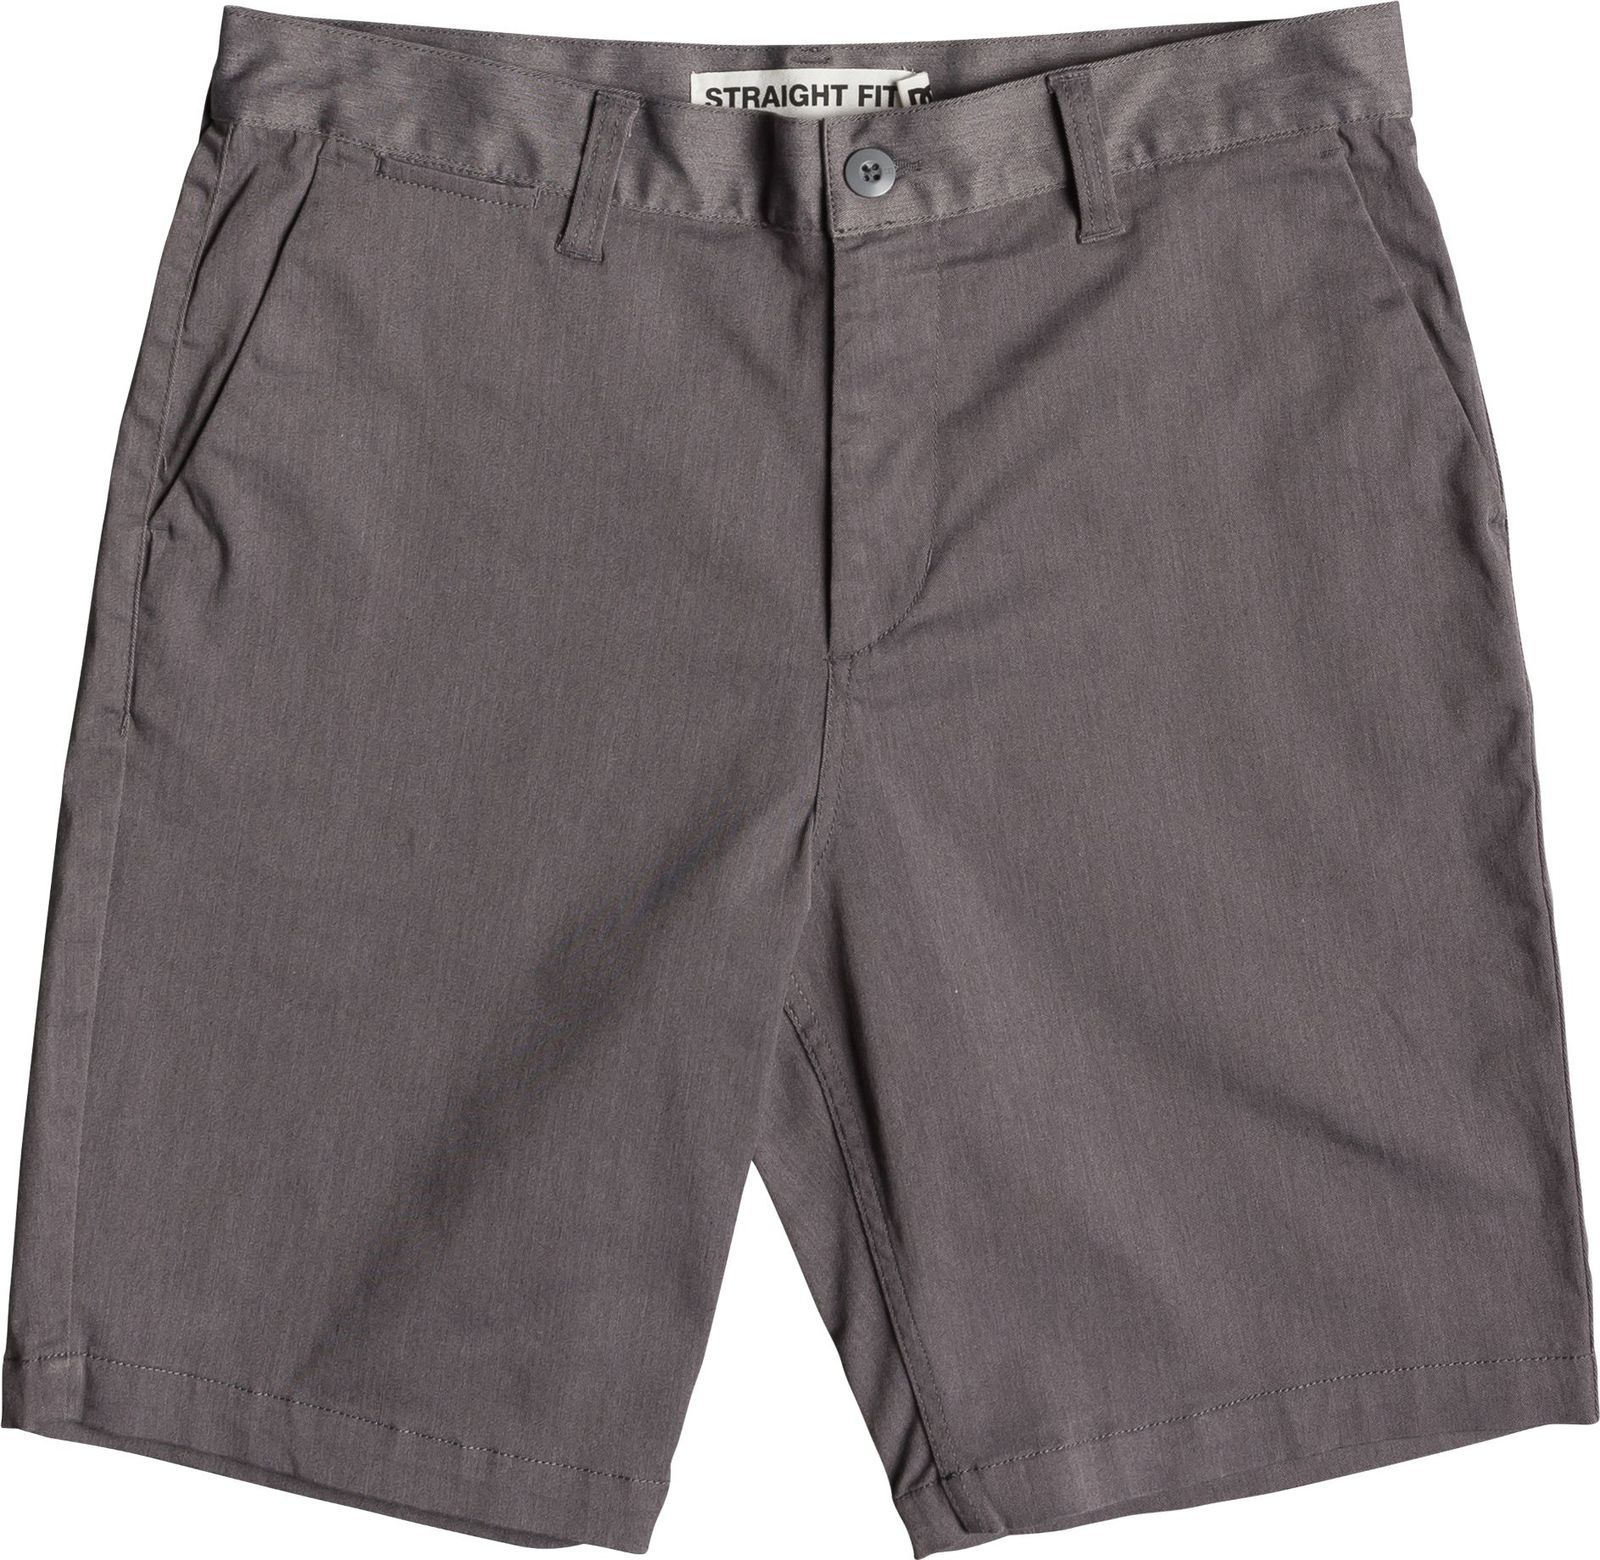   DC Shoes Worker Straight, :  . EDYWS03120-KNFH.  28 (42)